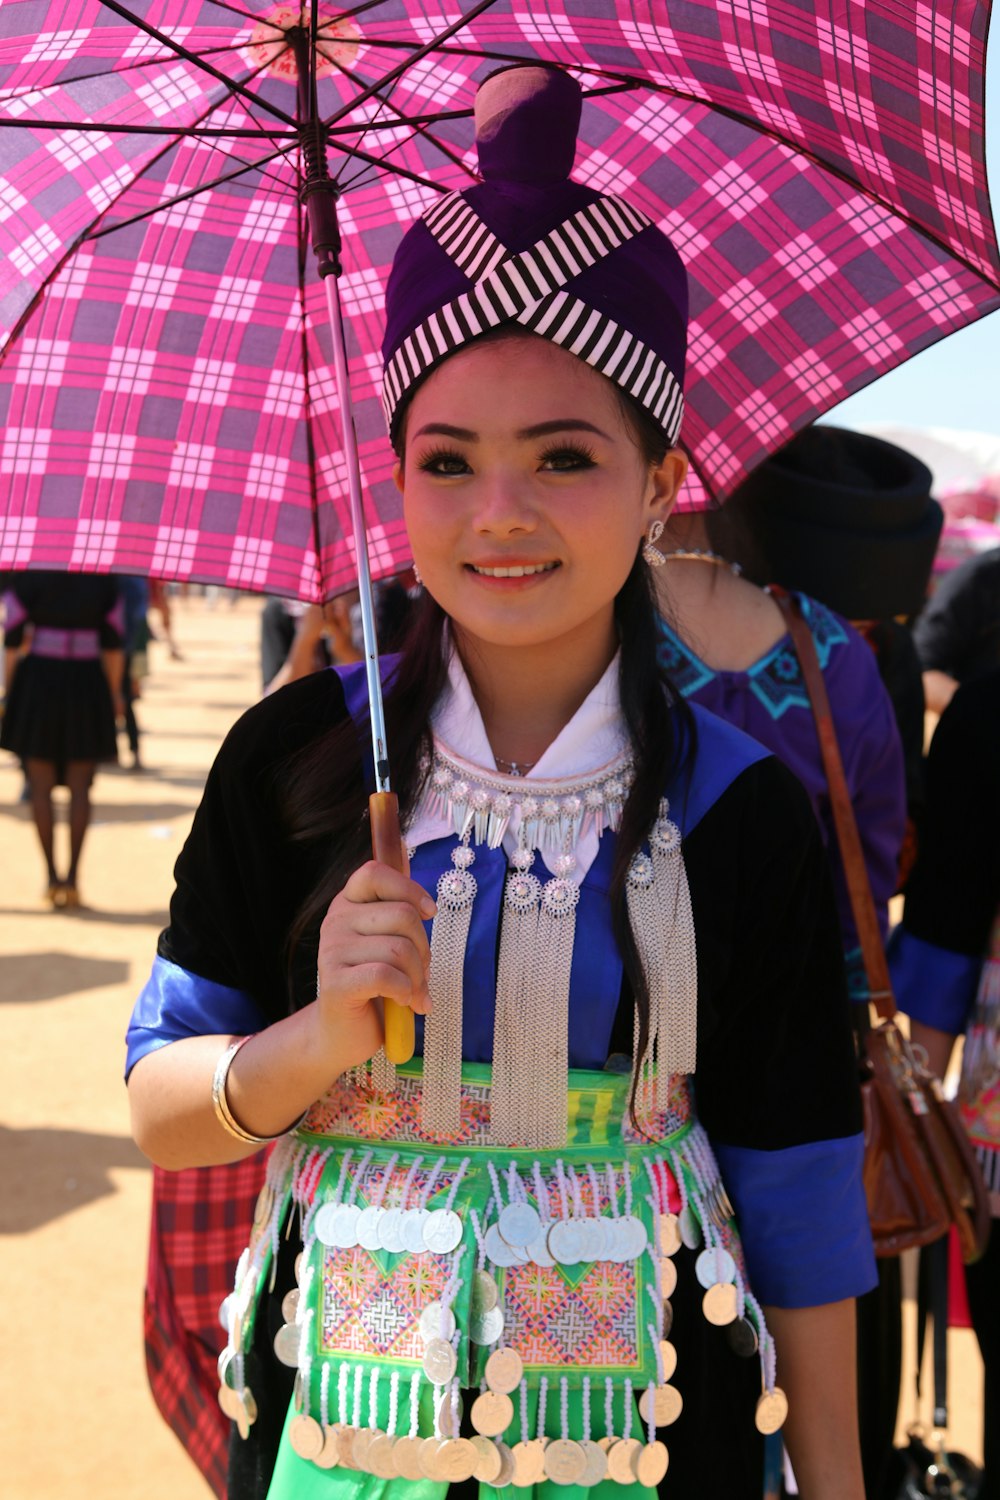 a young girl holding a pink umbrella on a sunny day